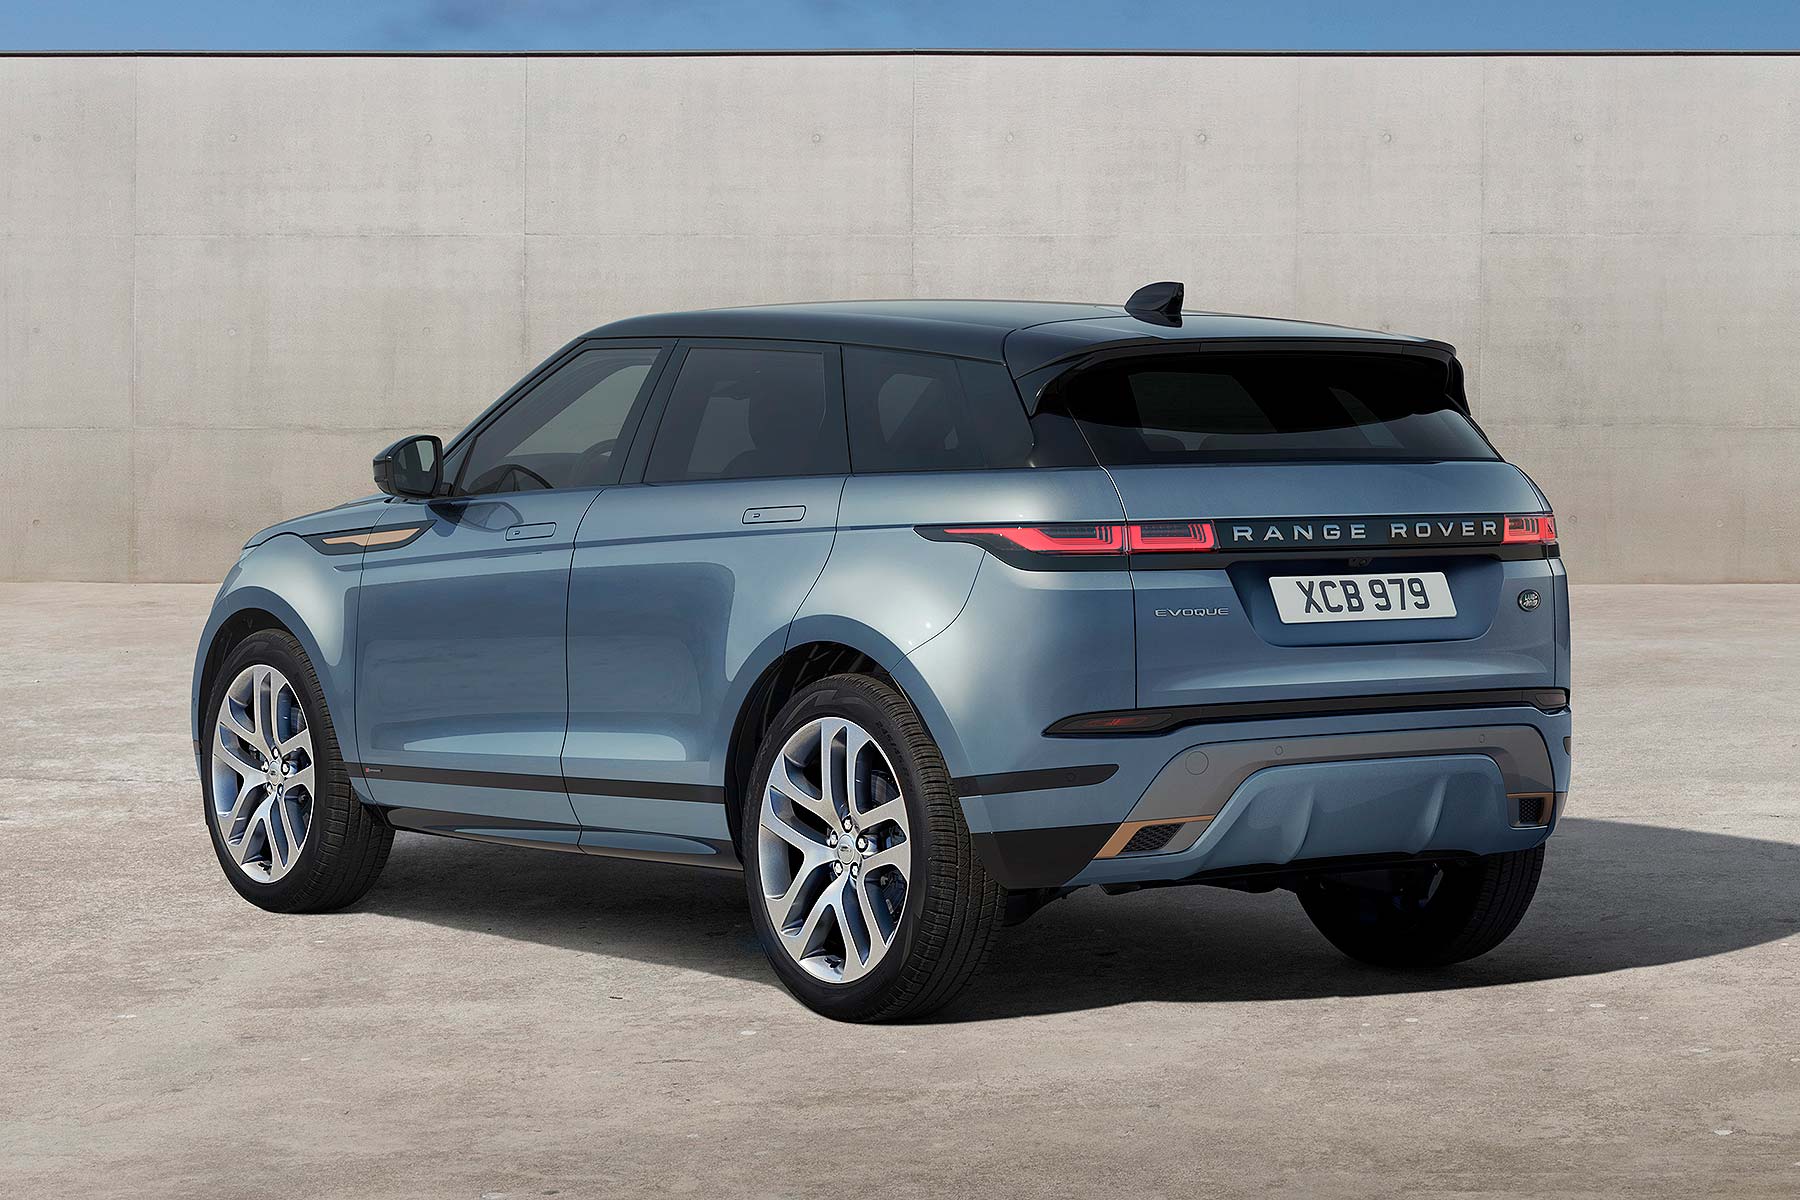 New 2019 Range Rover Evoque revealed and ordering is